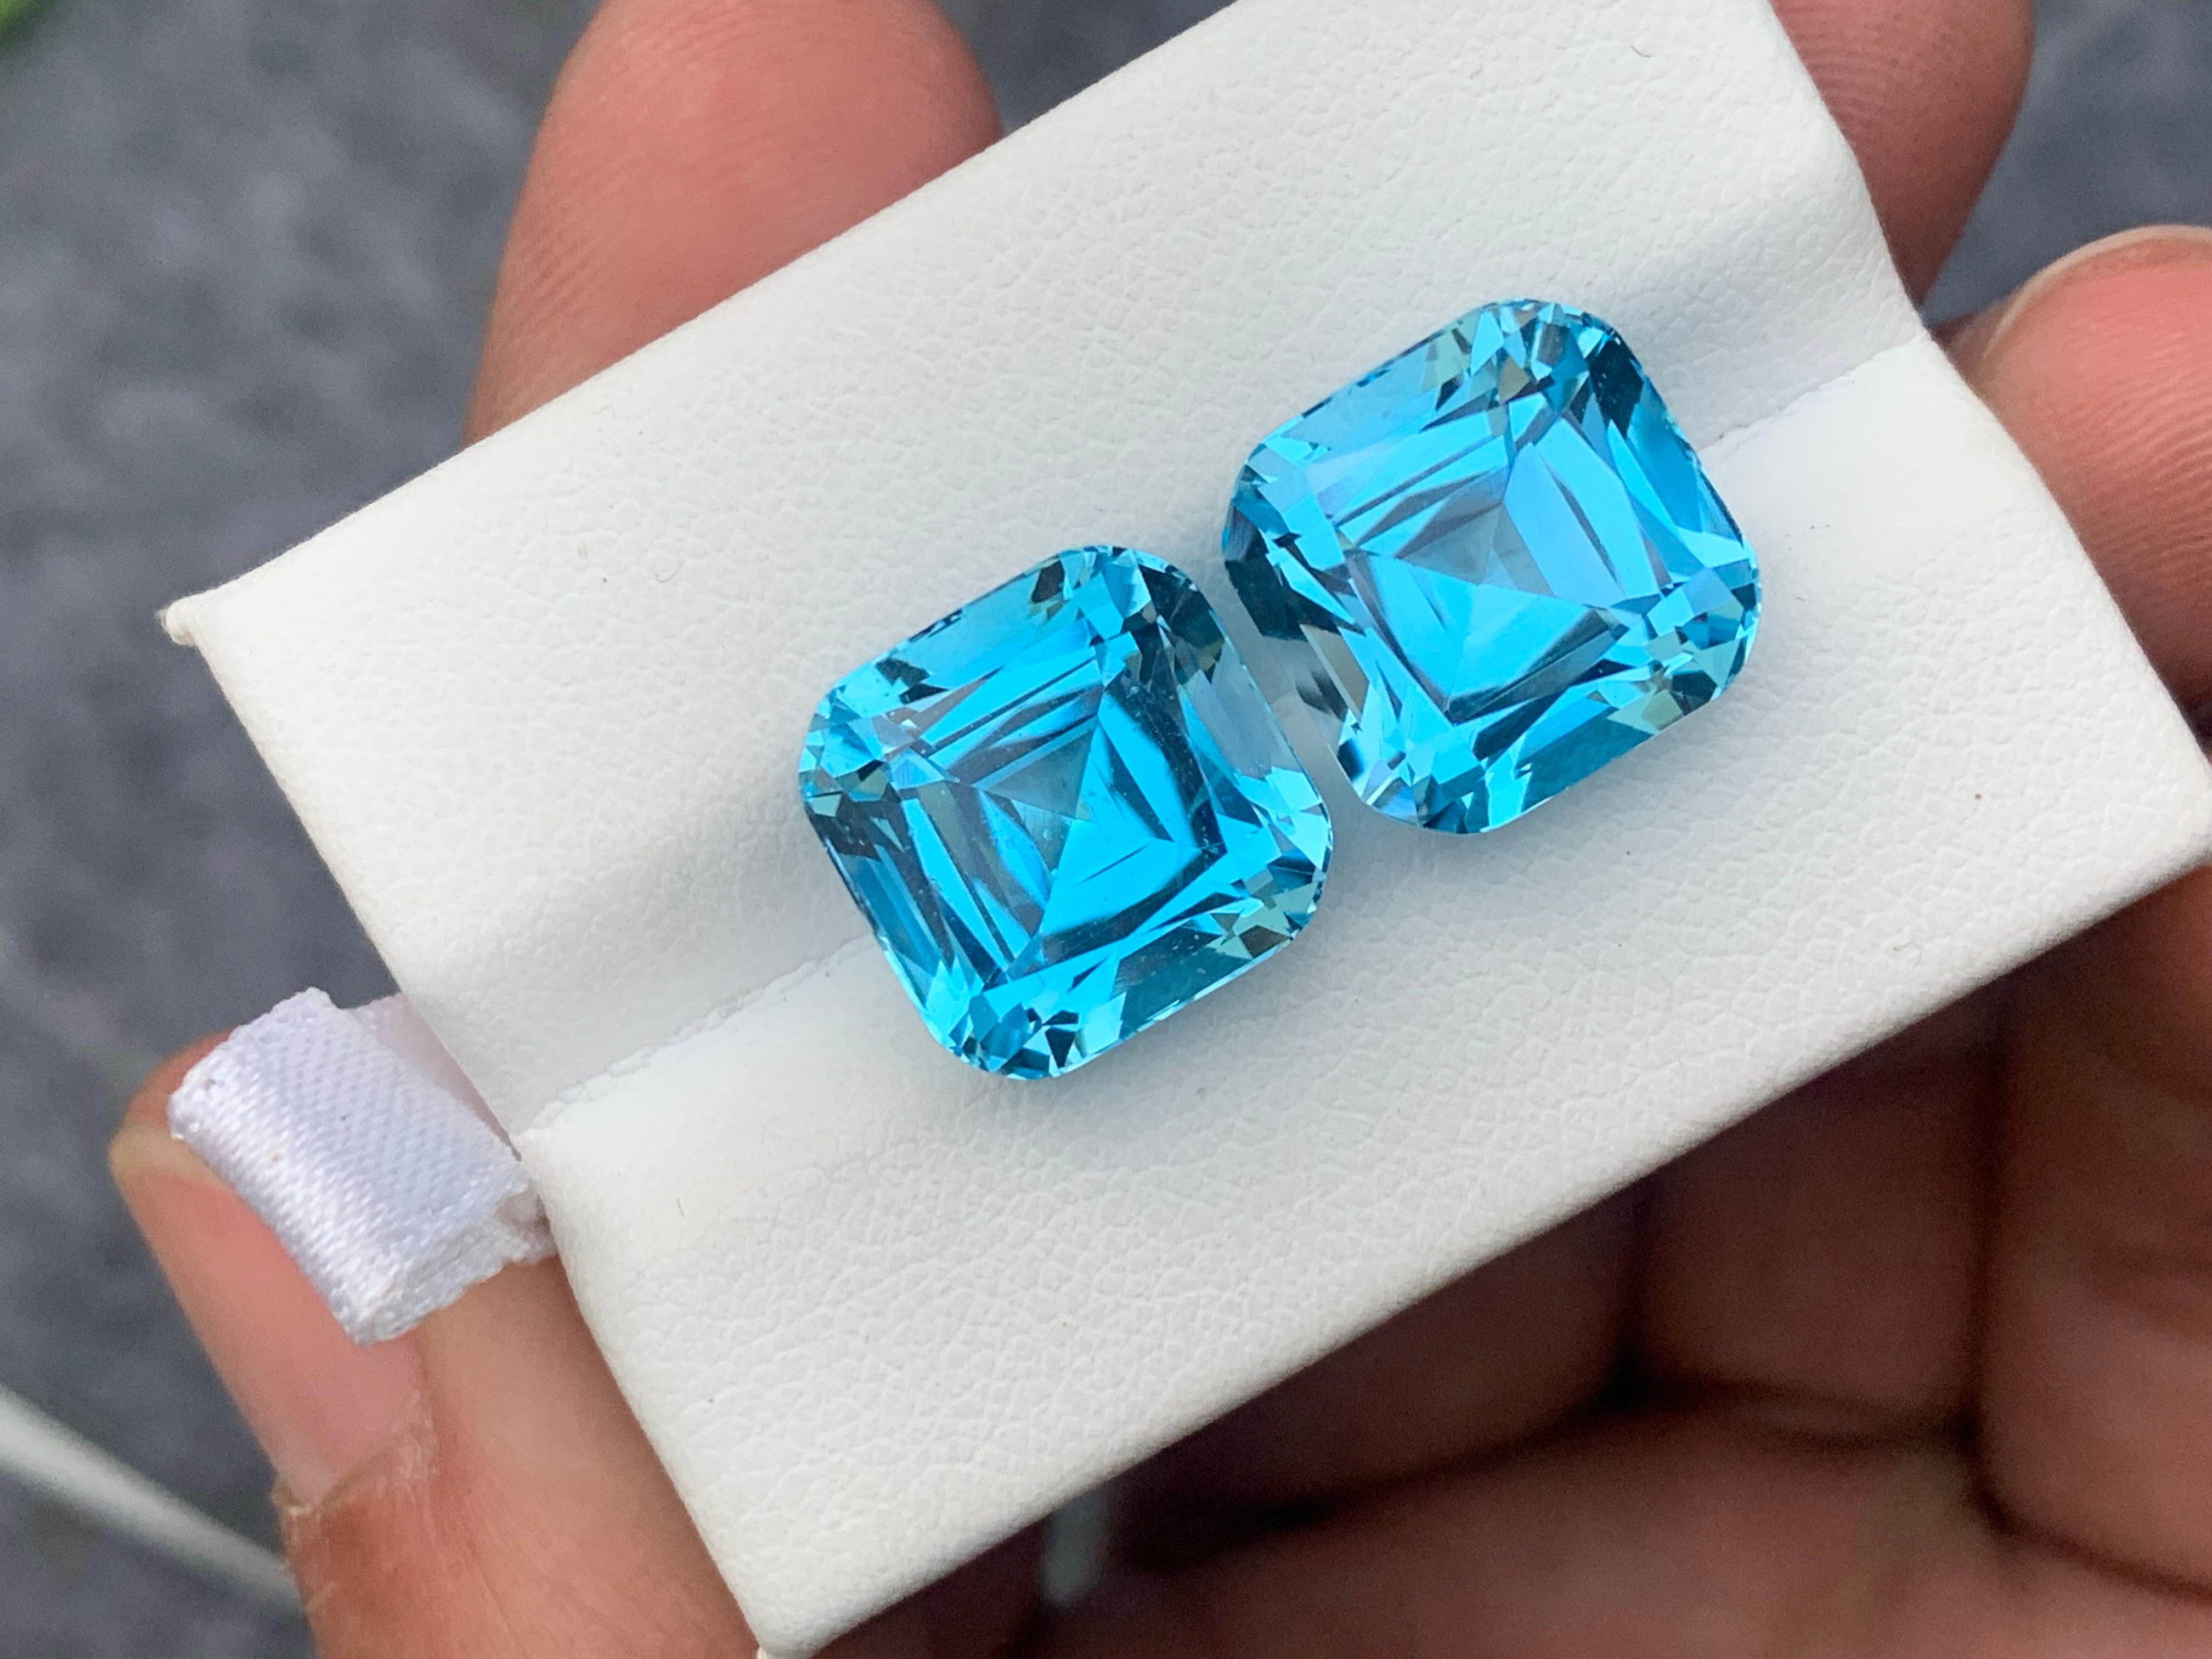 Exceptional Gorgeous Loose Sky Blue Topaz Pairs 25.40 Carat For Earrings Jewelry For Sale 2